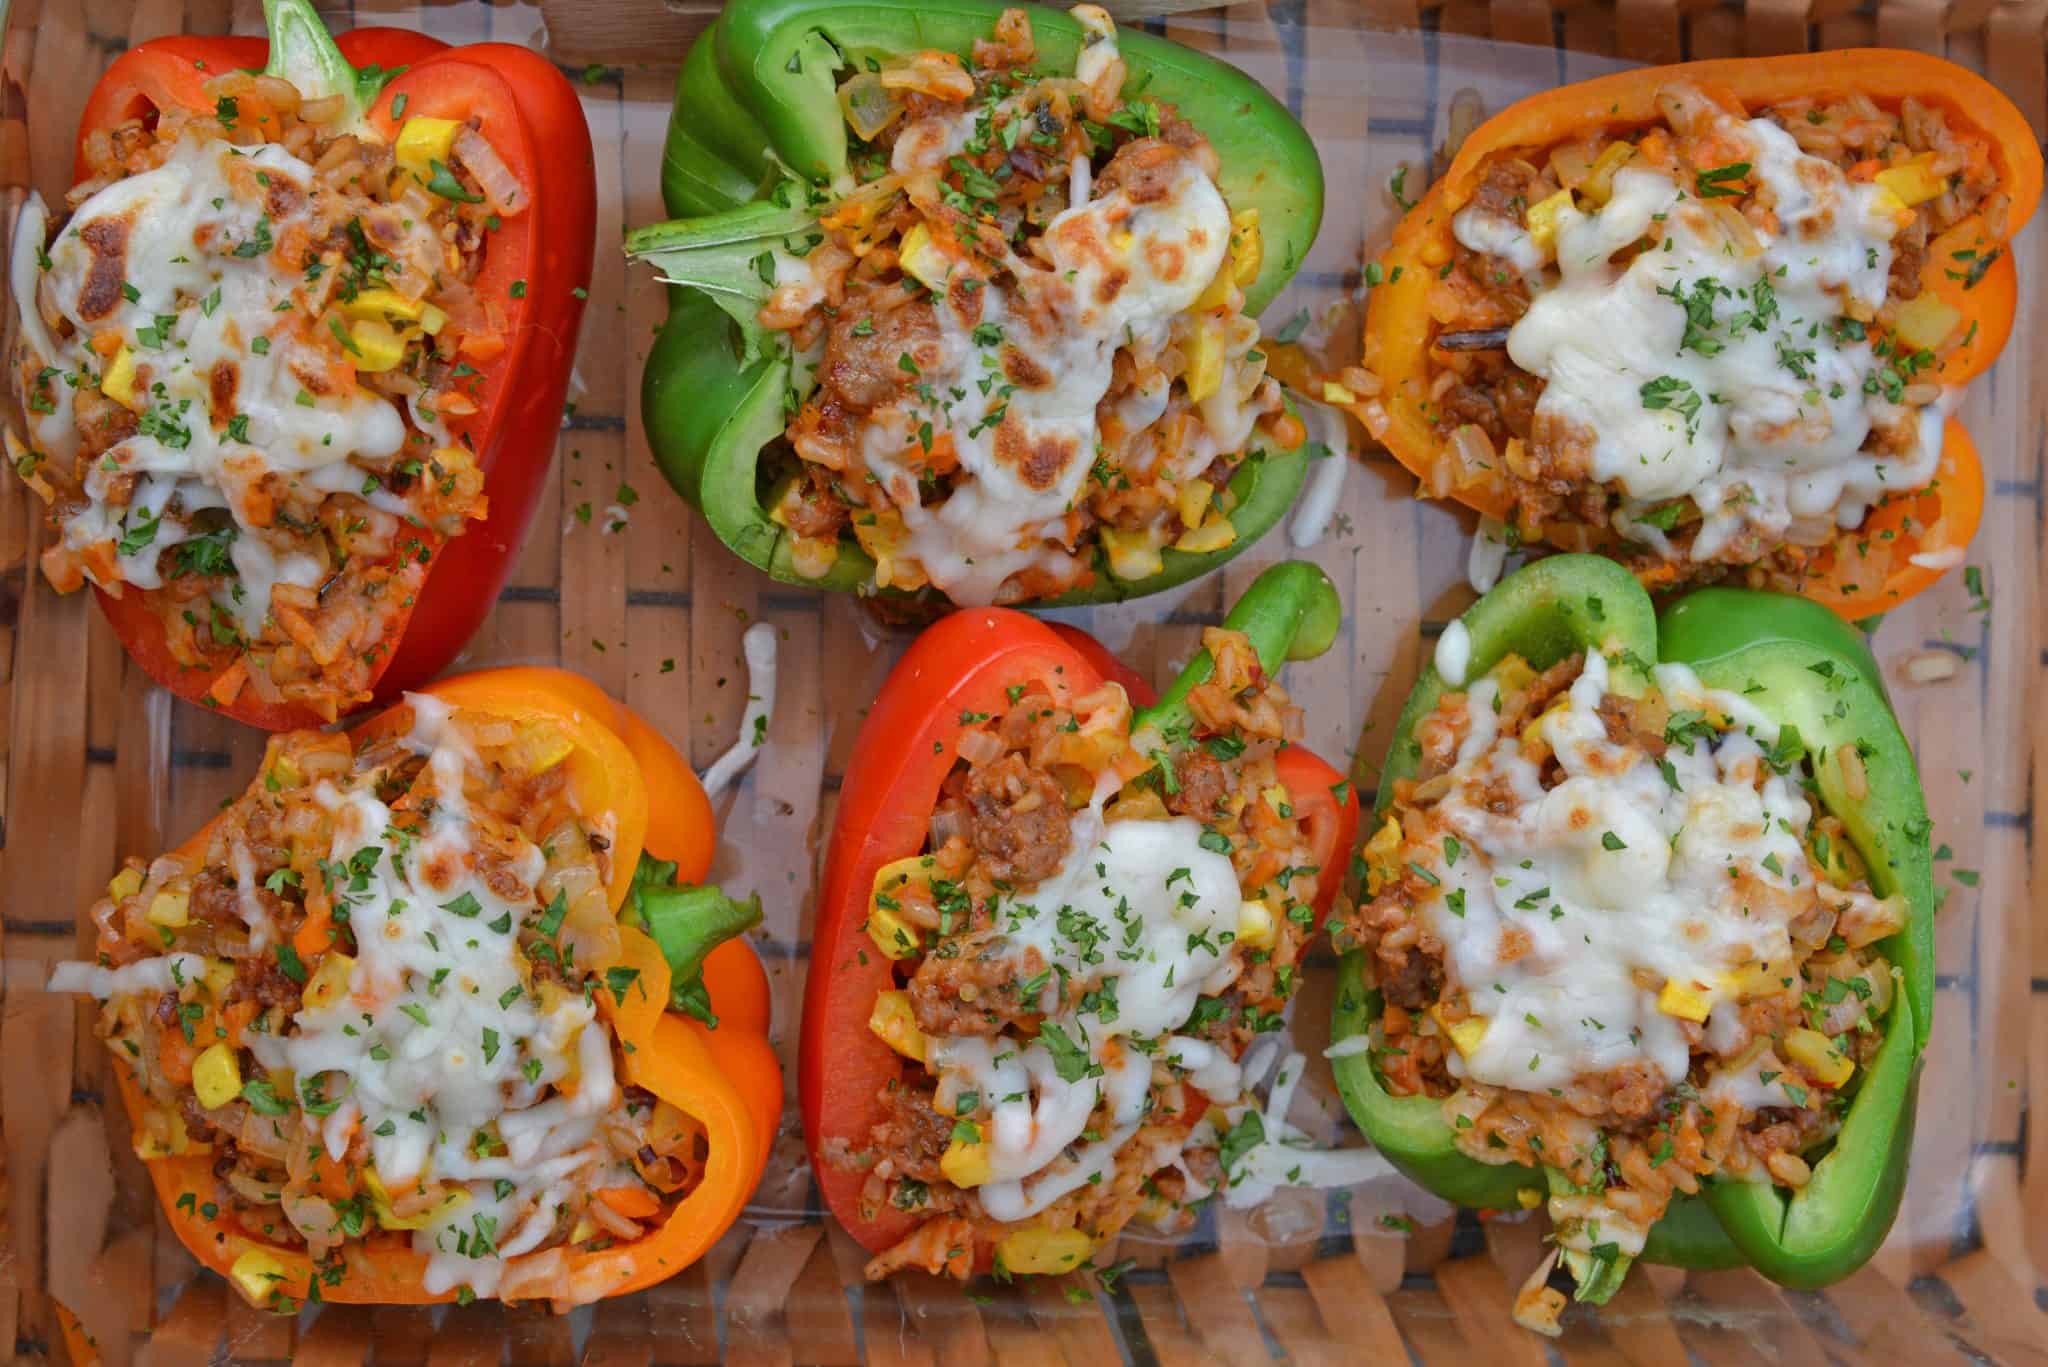 Sausage Stuffed Bell Peppers are a classic Italian dish using stuffed peppers with rice, sausage and lots of colorful vegetables. This make ahead dinner recipe will be a family favorite. #makeaheaddinner #stuffedbellepeppers www.savoryexperiments.com